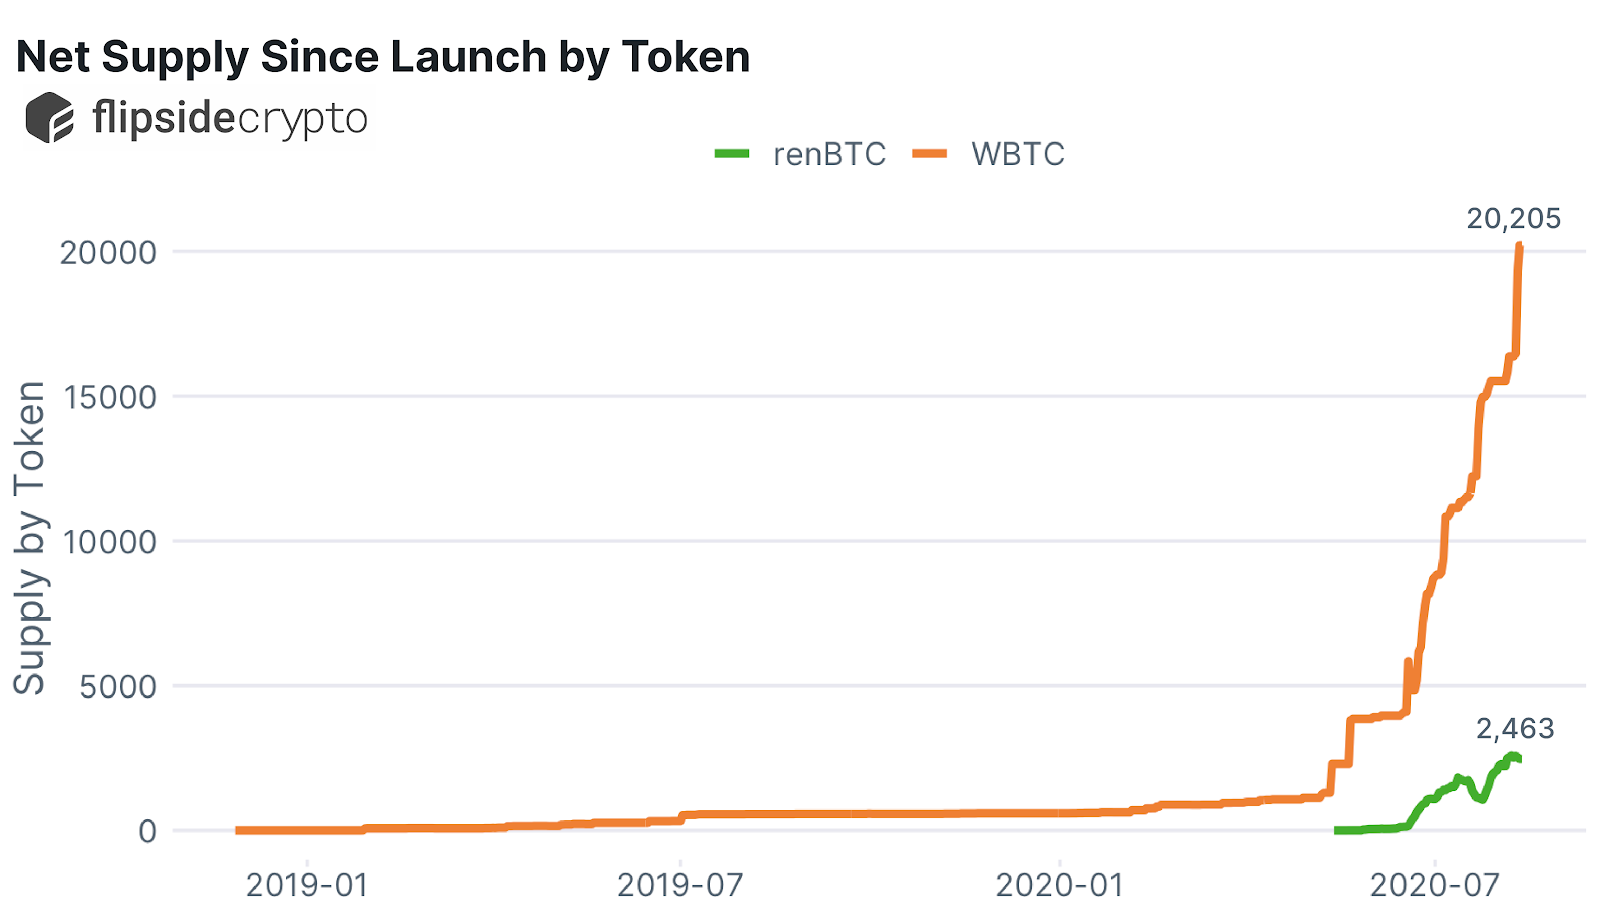 wBTC and renBTC net supply since launch. Source: Flipside Crypto